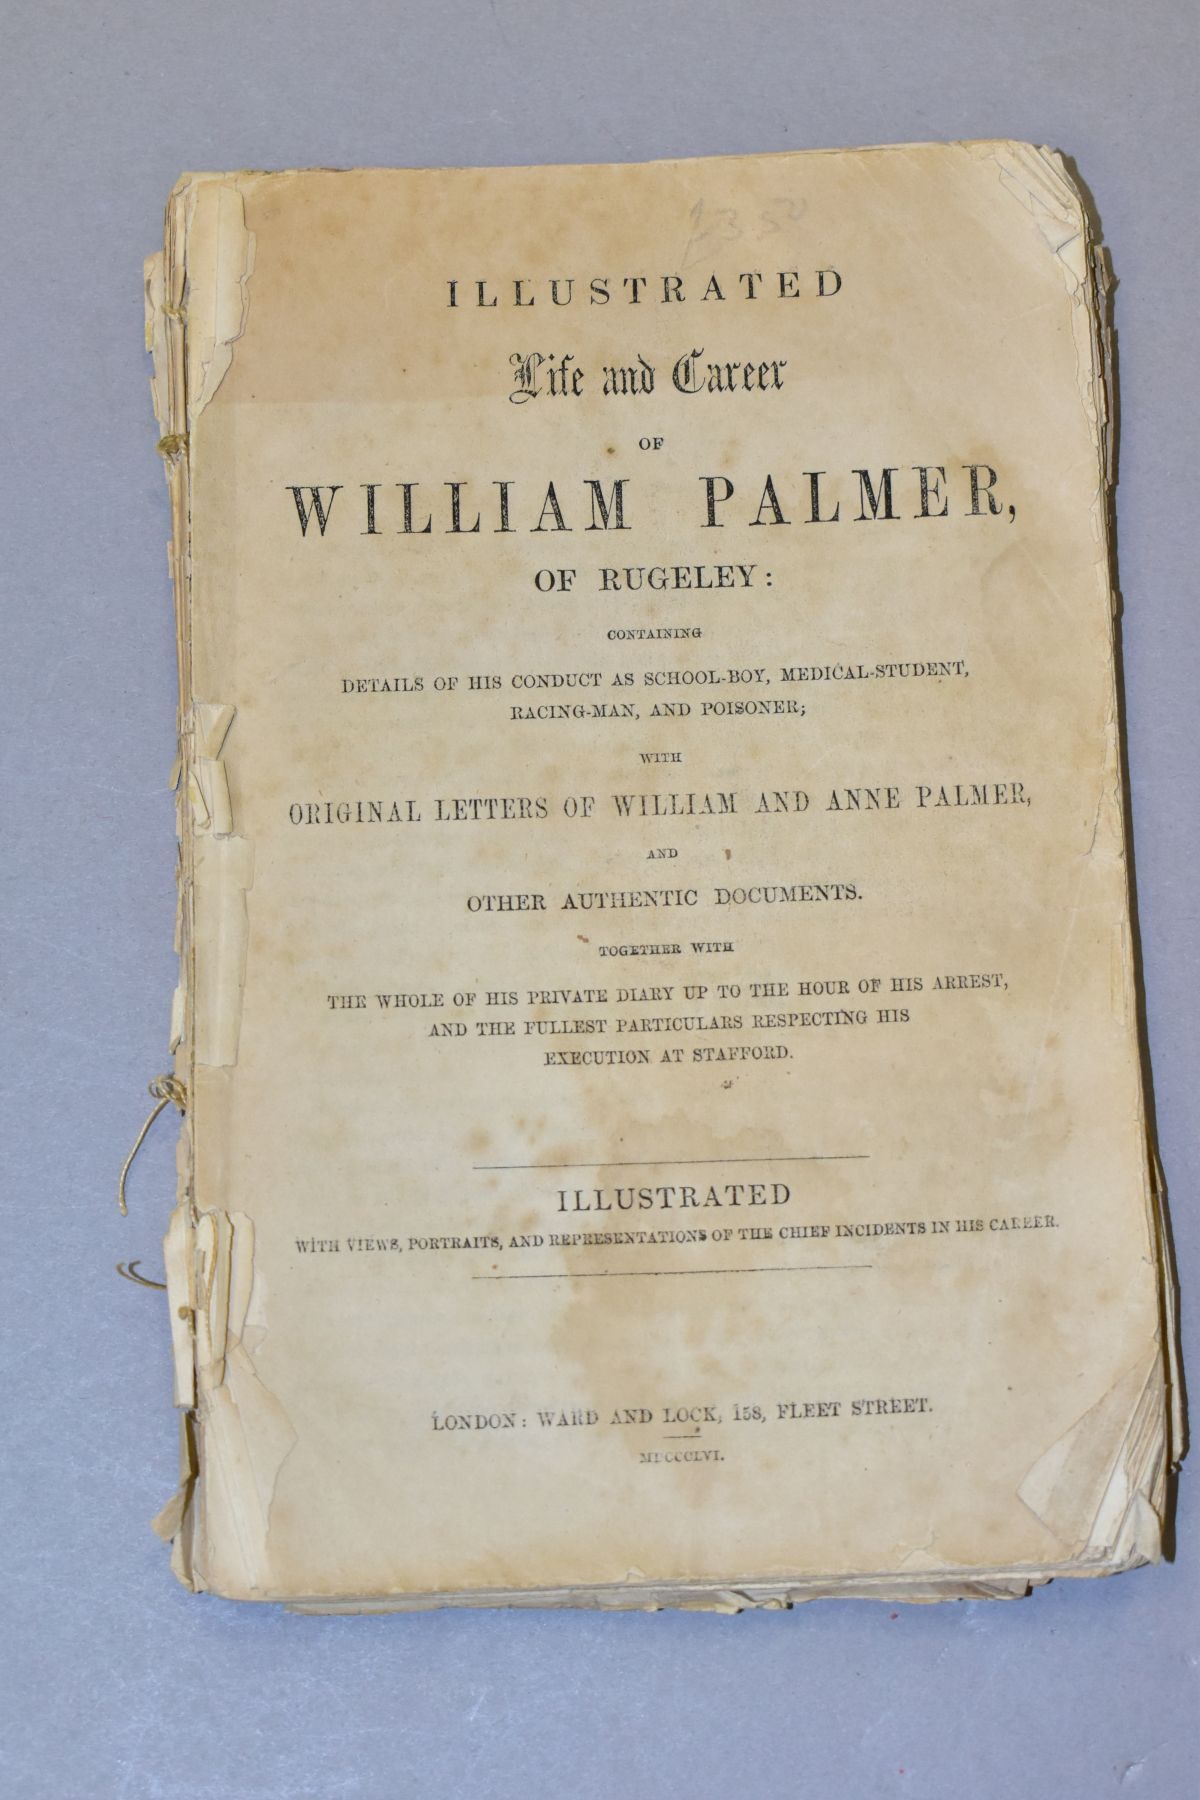 THE ILLUSTRATED LIFE & CAREER OF WILLIAM PALMER of RUGELEY; containing details of his conduct as a